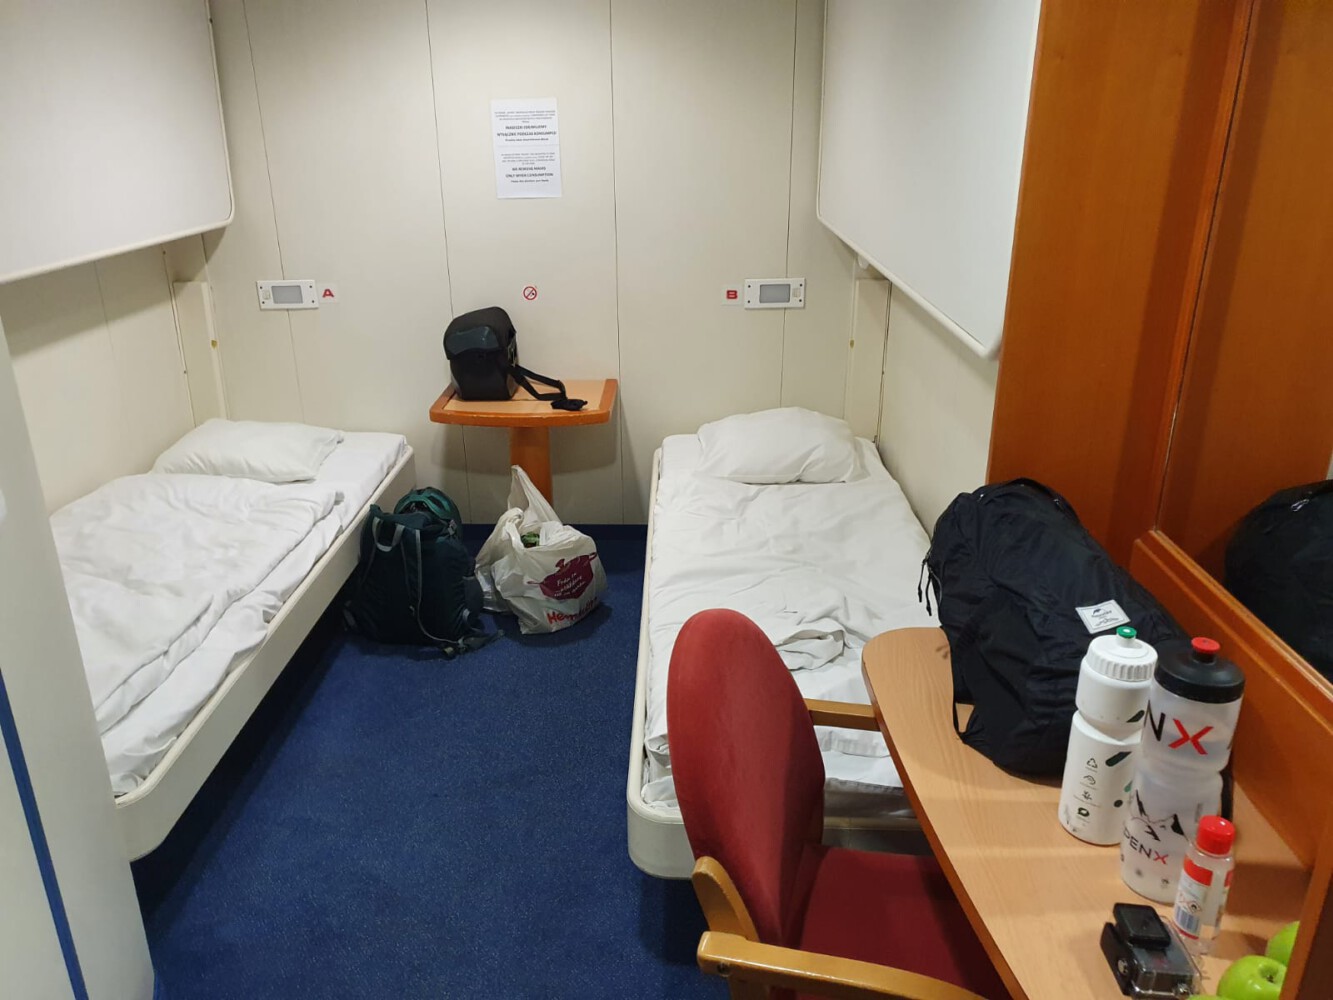 Our cabin on the ferry to Poland.